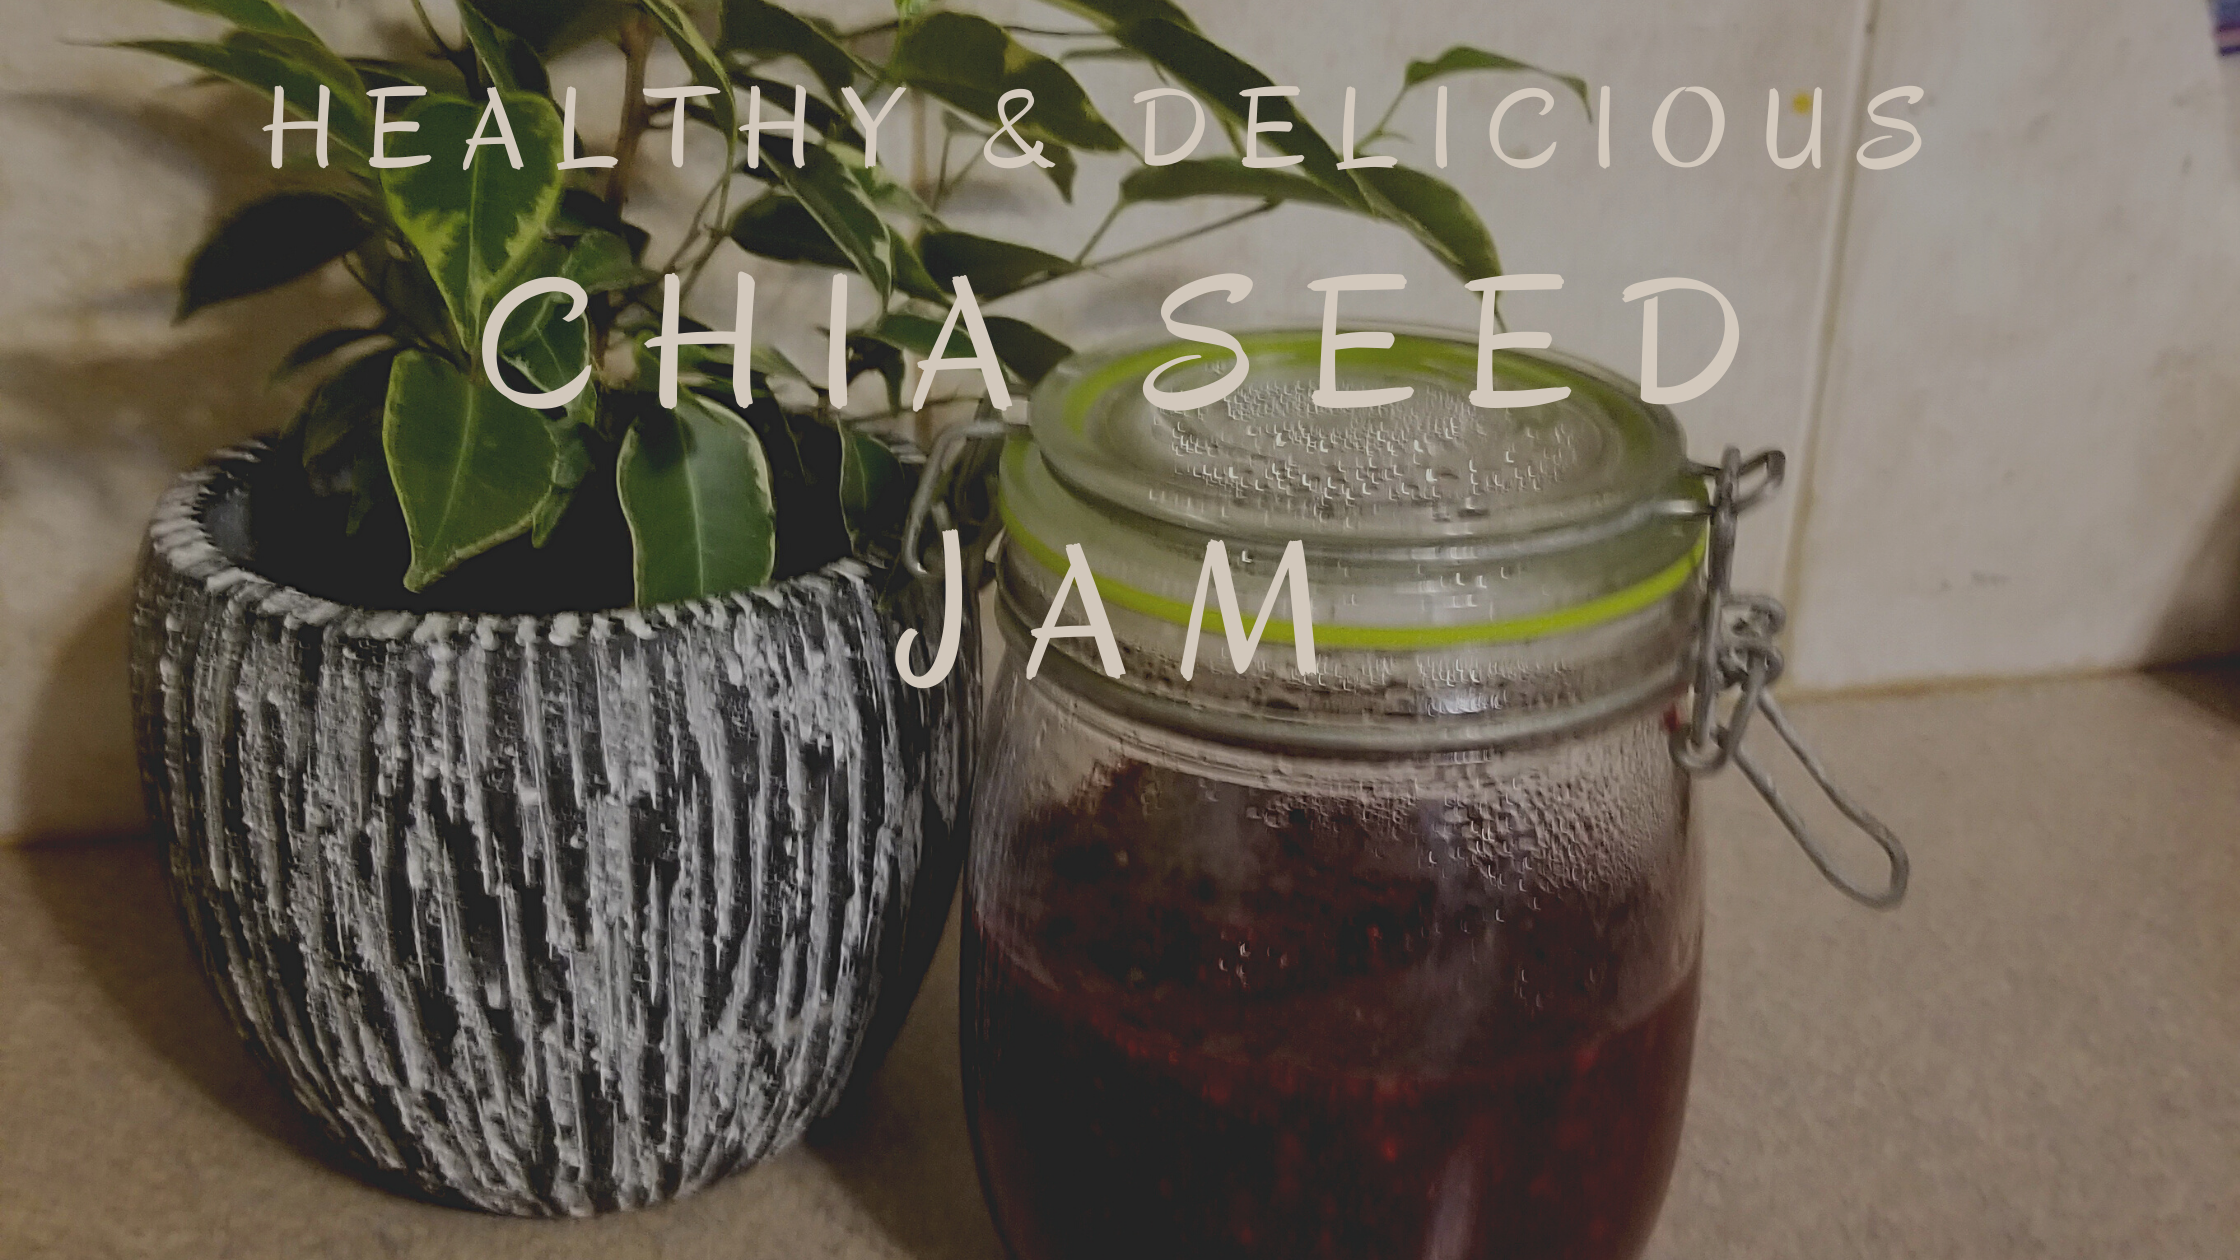 Easy, healthy and delicious ~ Chia seed jam!